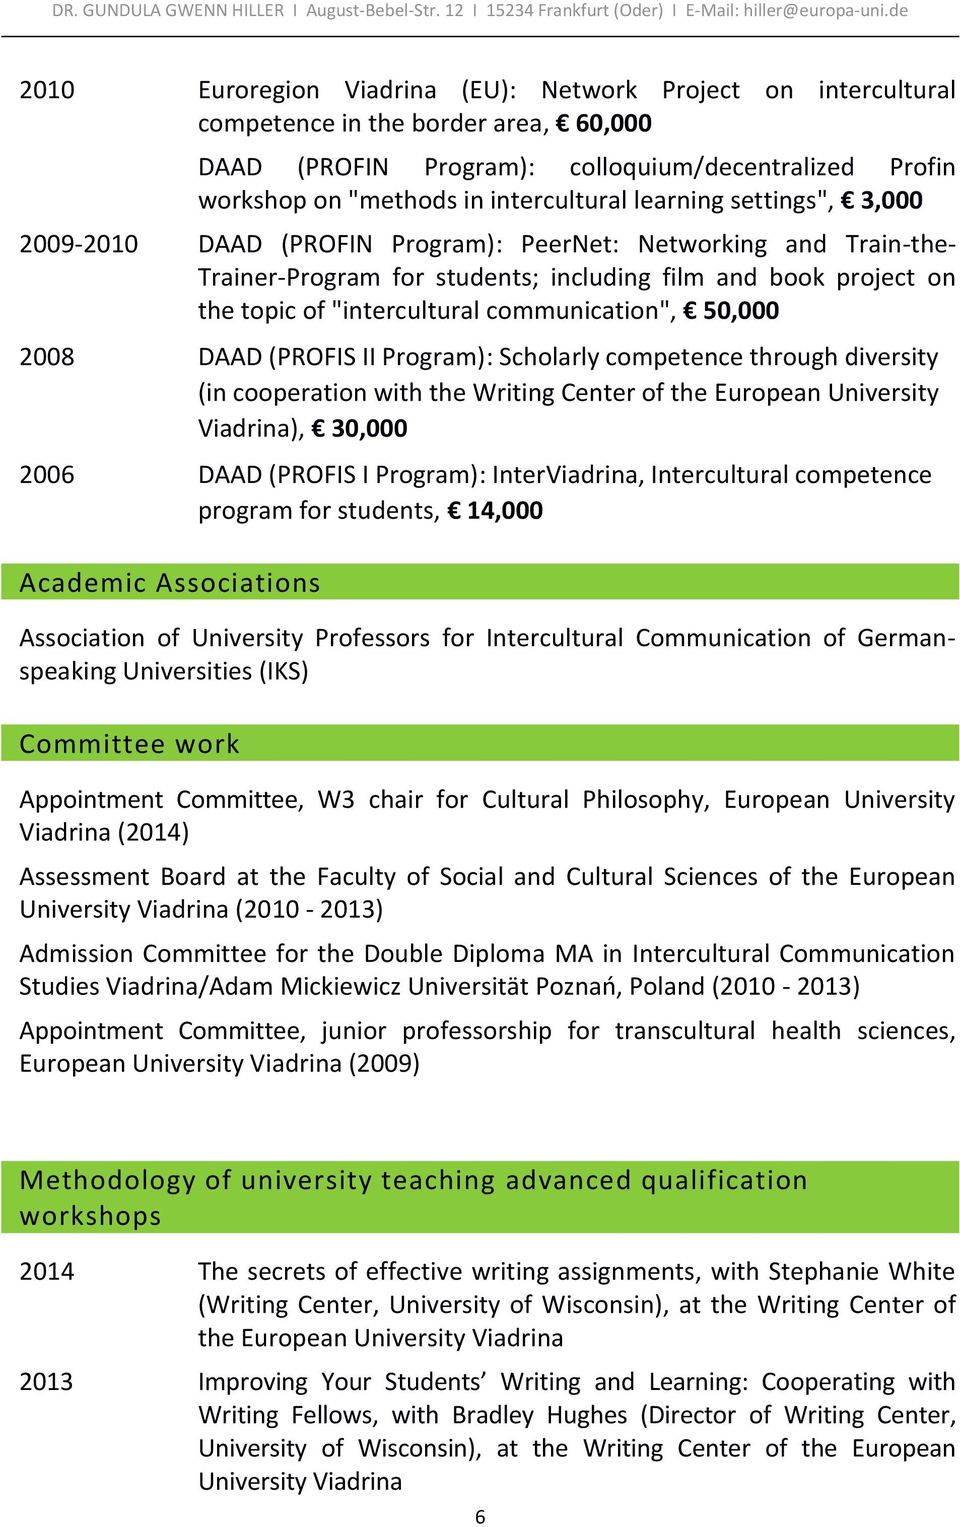 communication", 50,000 2008 DAAD (PROFIS II Program): Scholarly competence through diversity (in cooperation with the Writing Center of the European University Viadrina), 30,000 2006 DAAD (PROFIS I